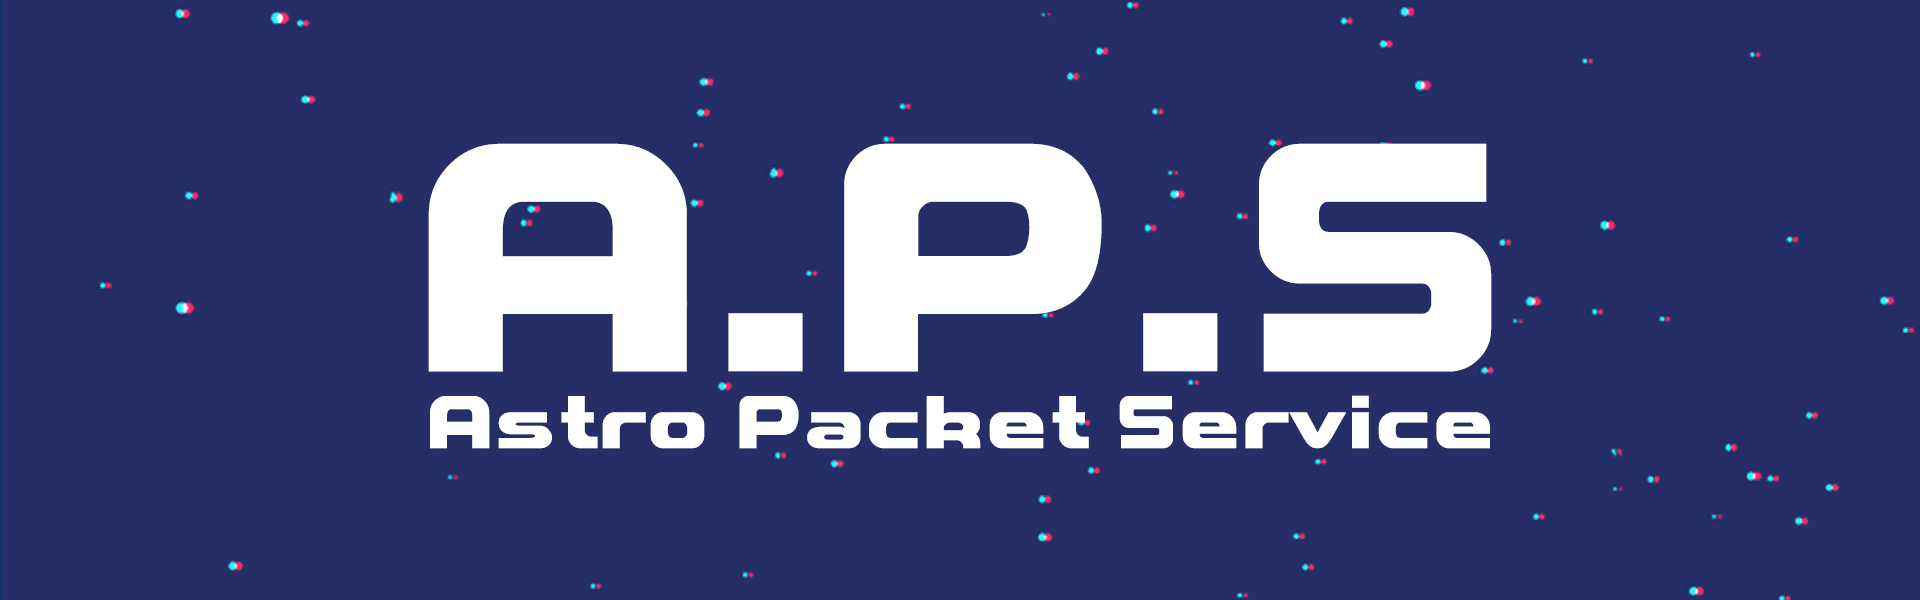 Astro Packet Service